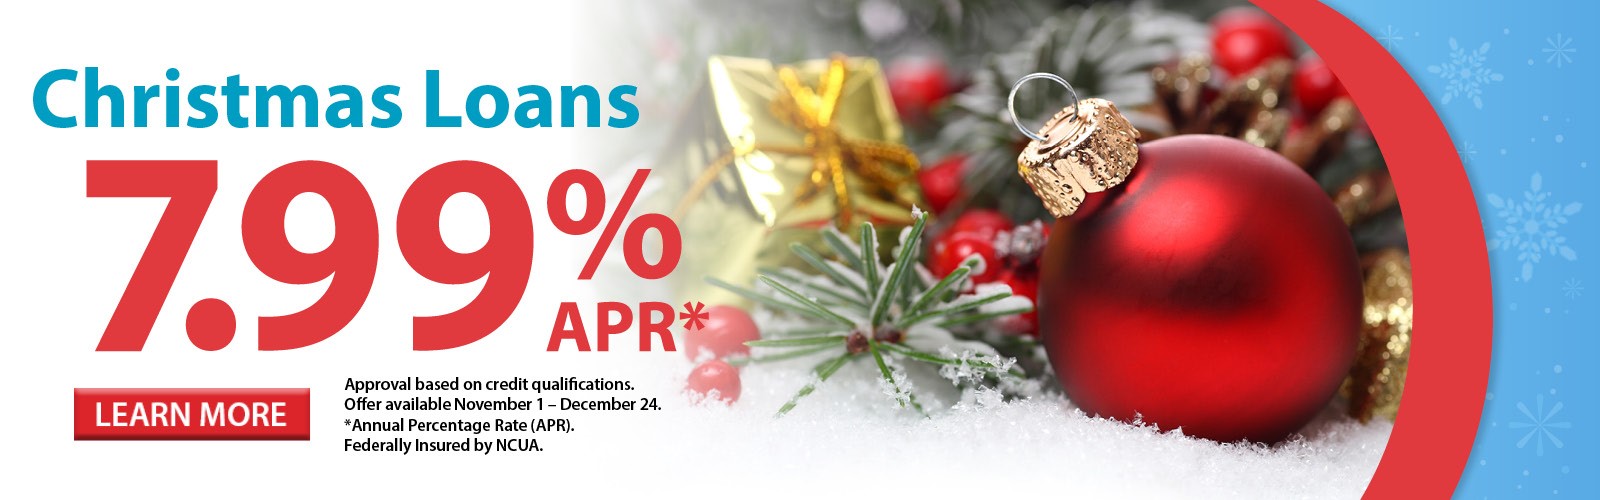 Christmas Loans are now available. Click here for more information!